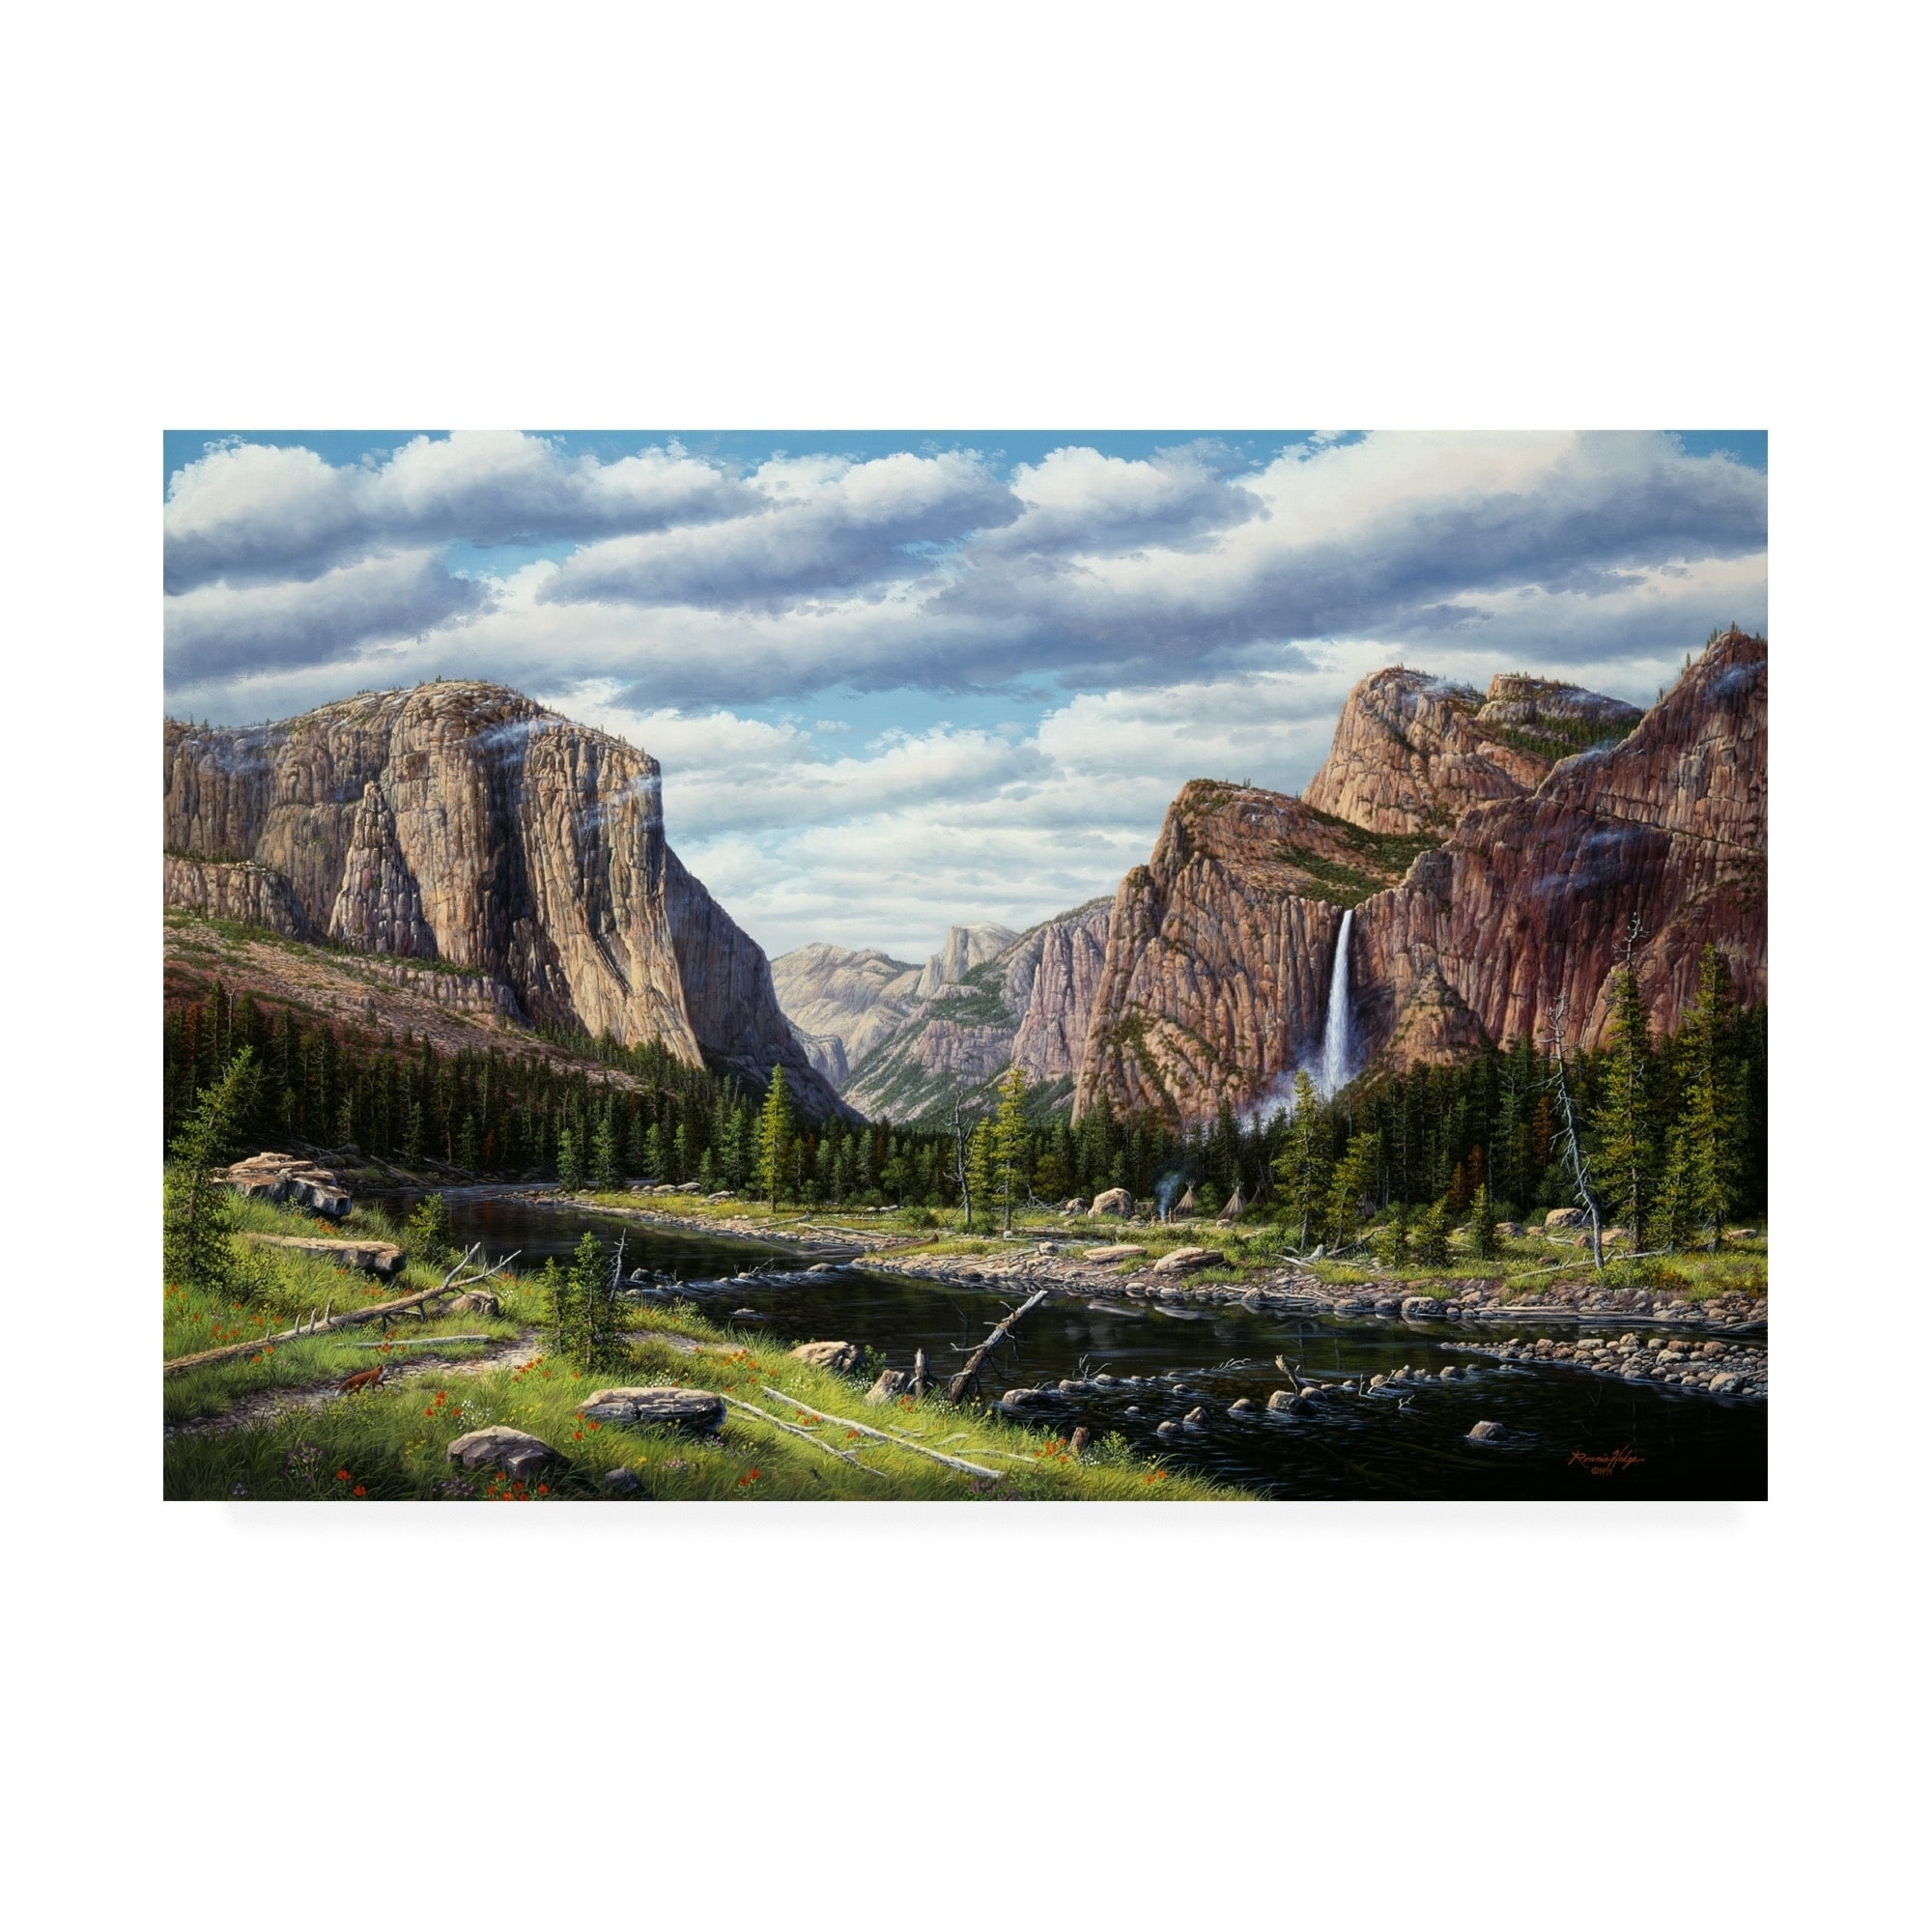 R W Hedge 'River of Mercy' Canvas Art